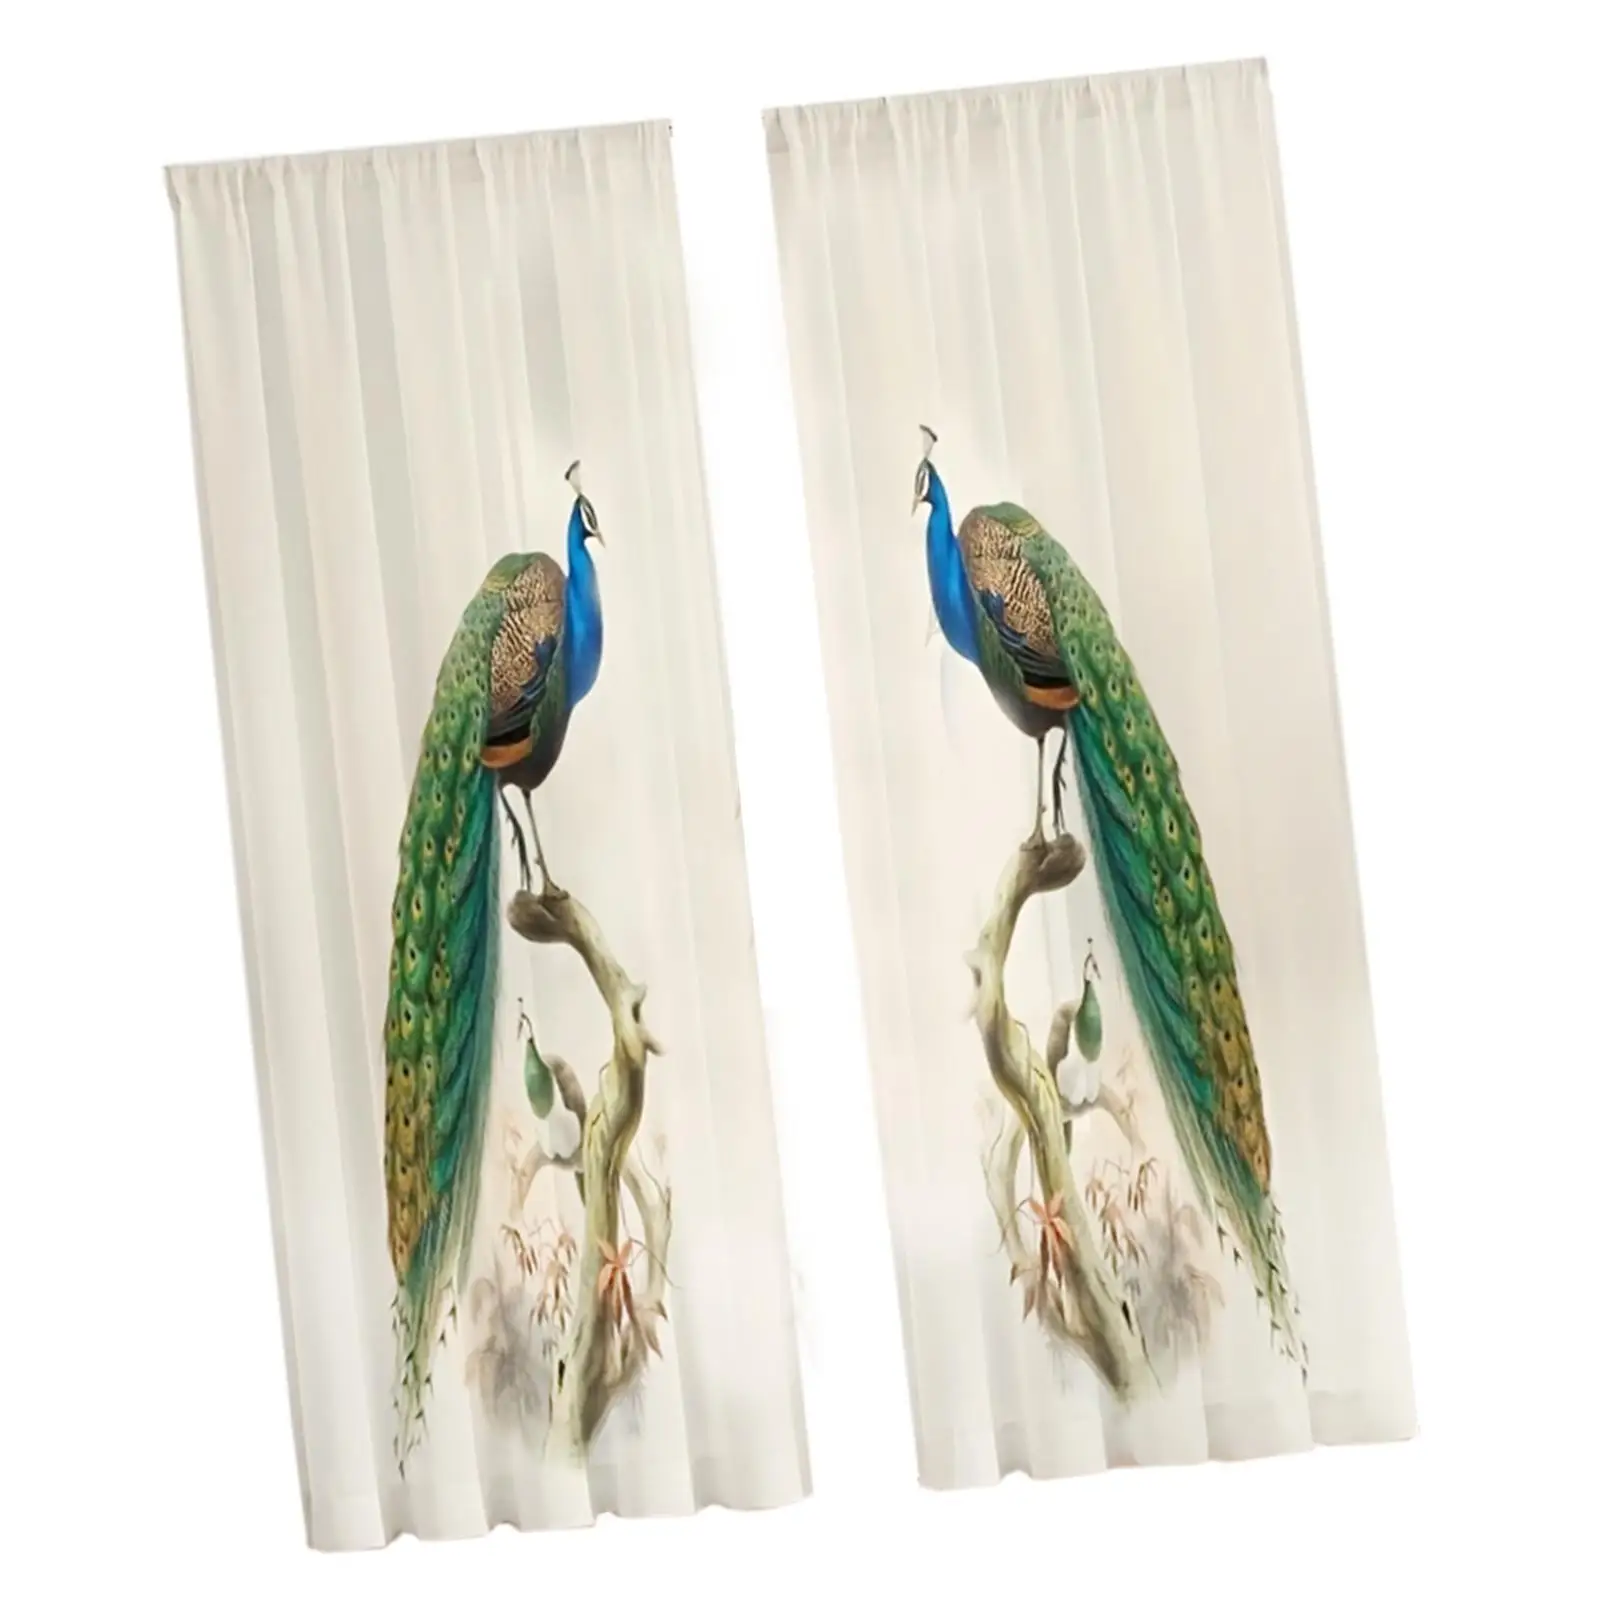 Printed Sheer Curtains Window Curtains for Home Decoration Yard Bedroom